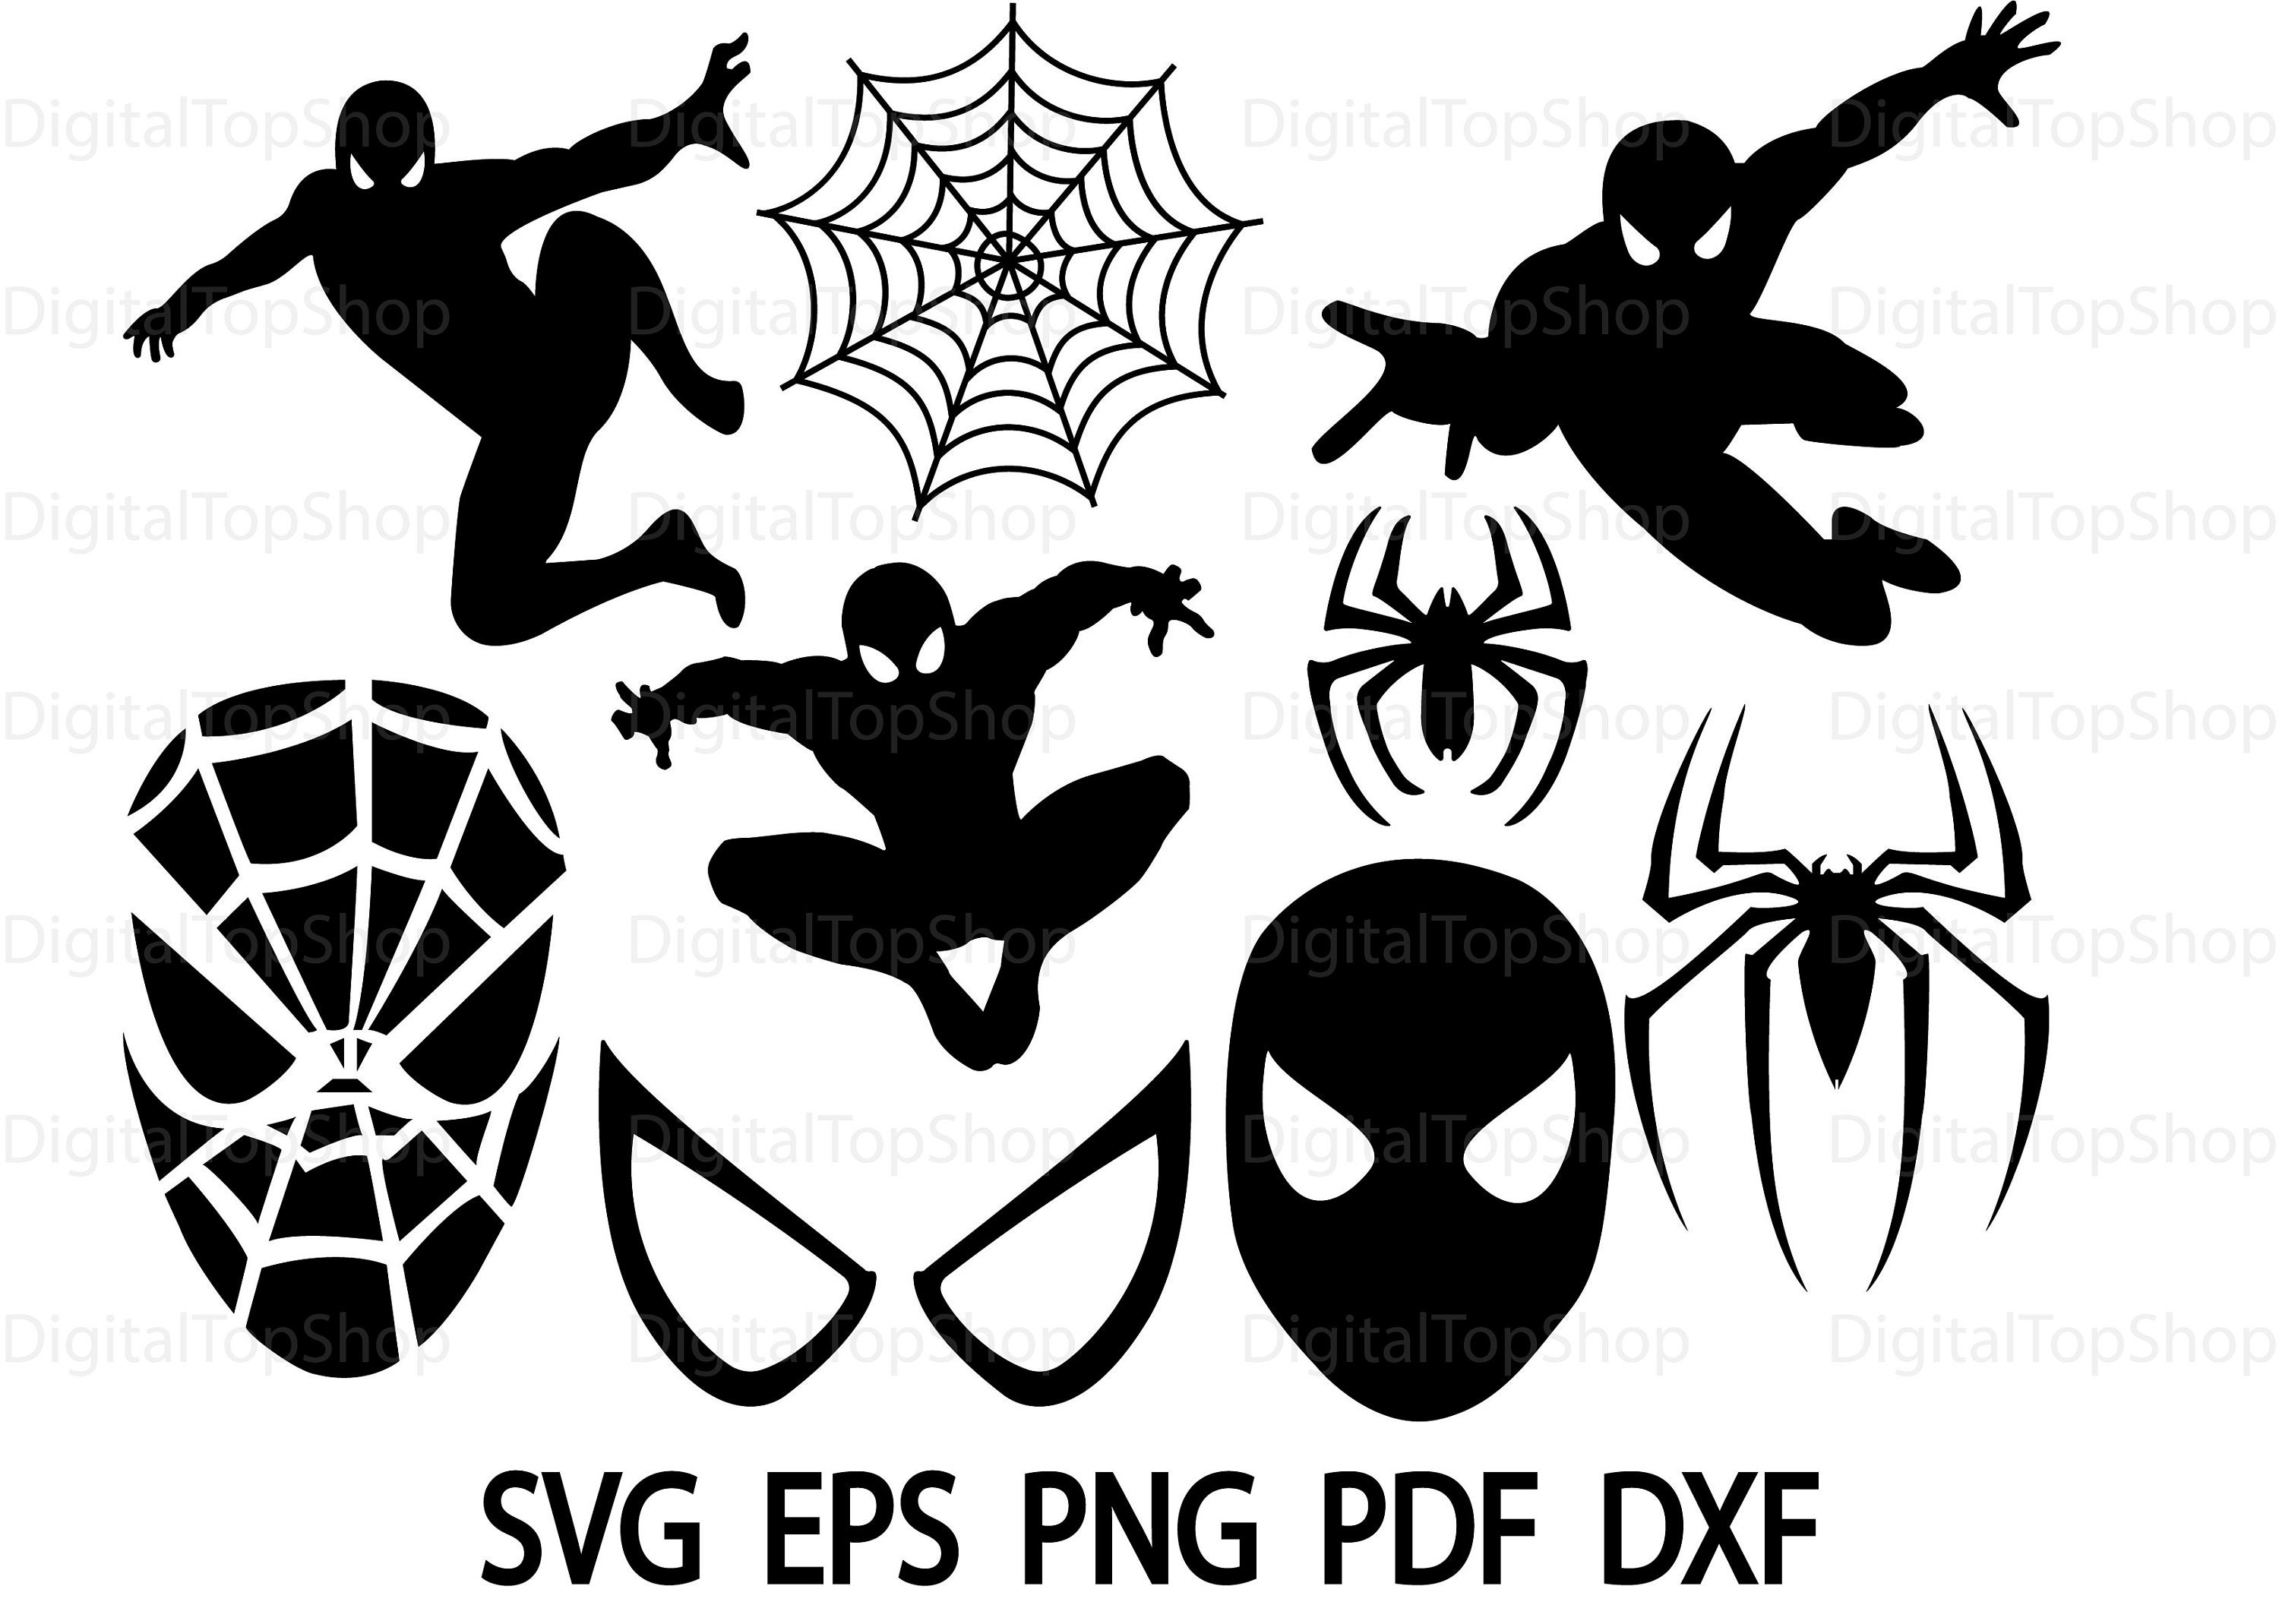 Spiderman Svg Spiderman Cutfiles Dxf Eps & Png Cutfiles | Etsy